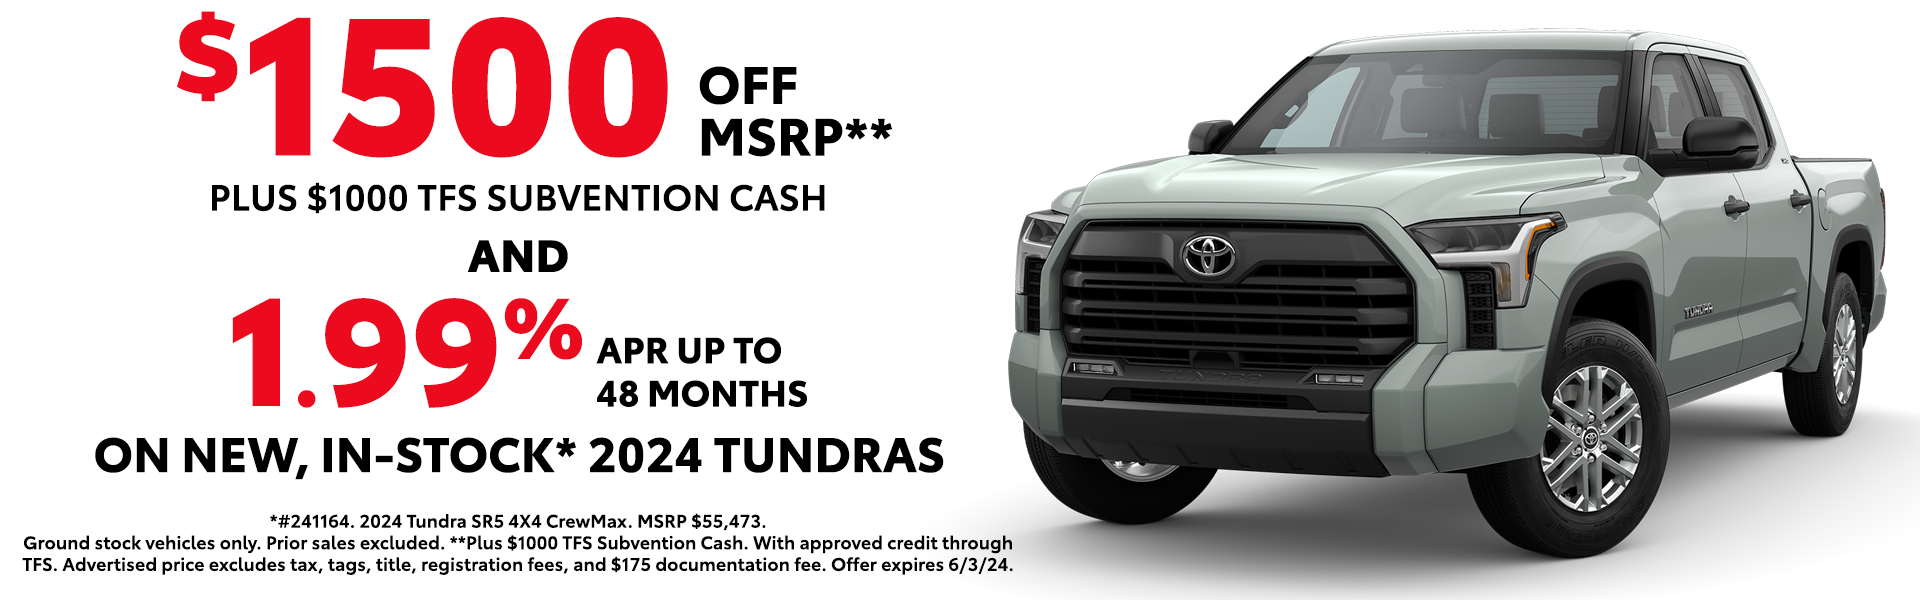 Special Offers on New In Stock 2024 Tundra